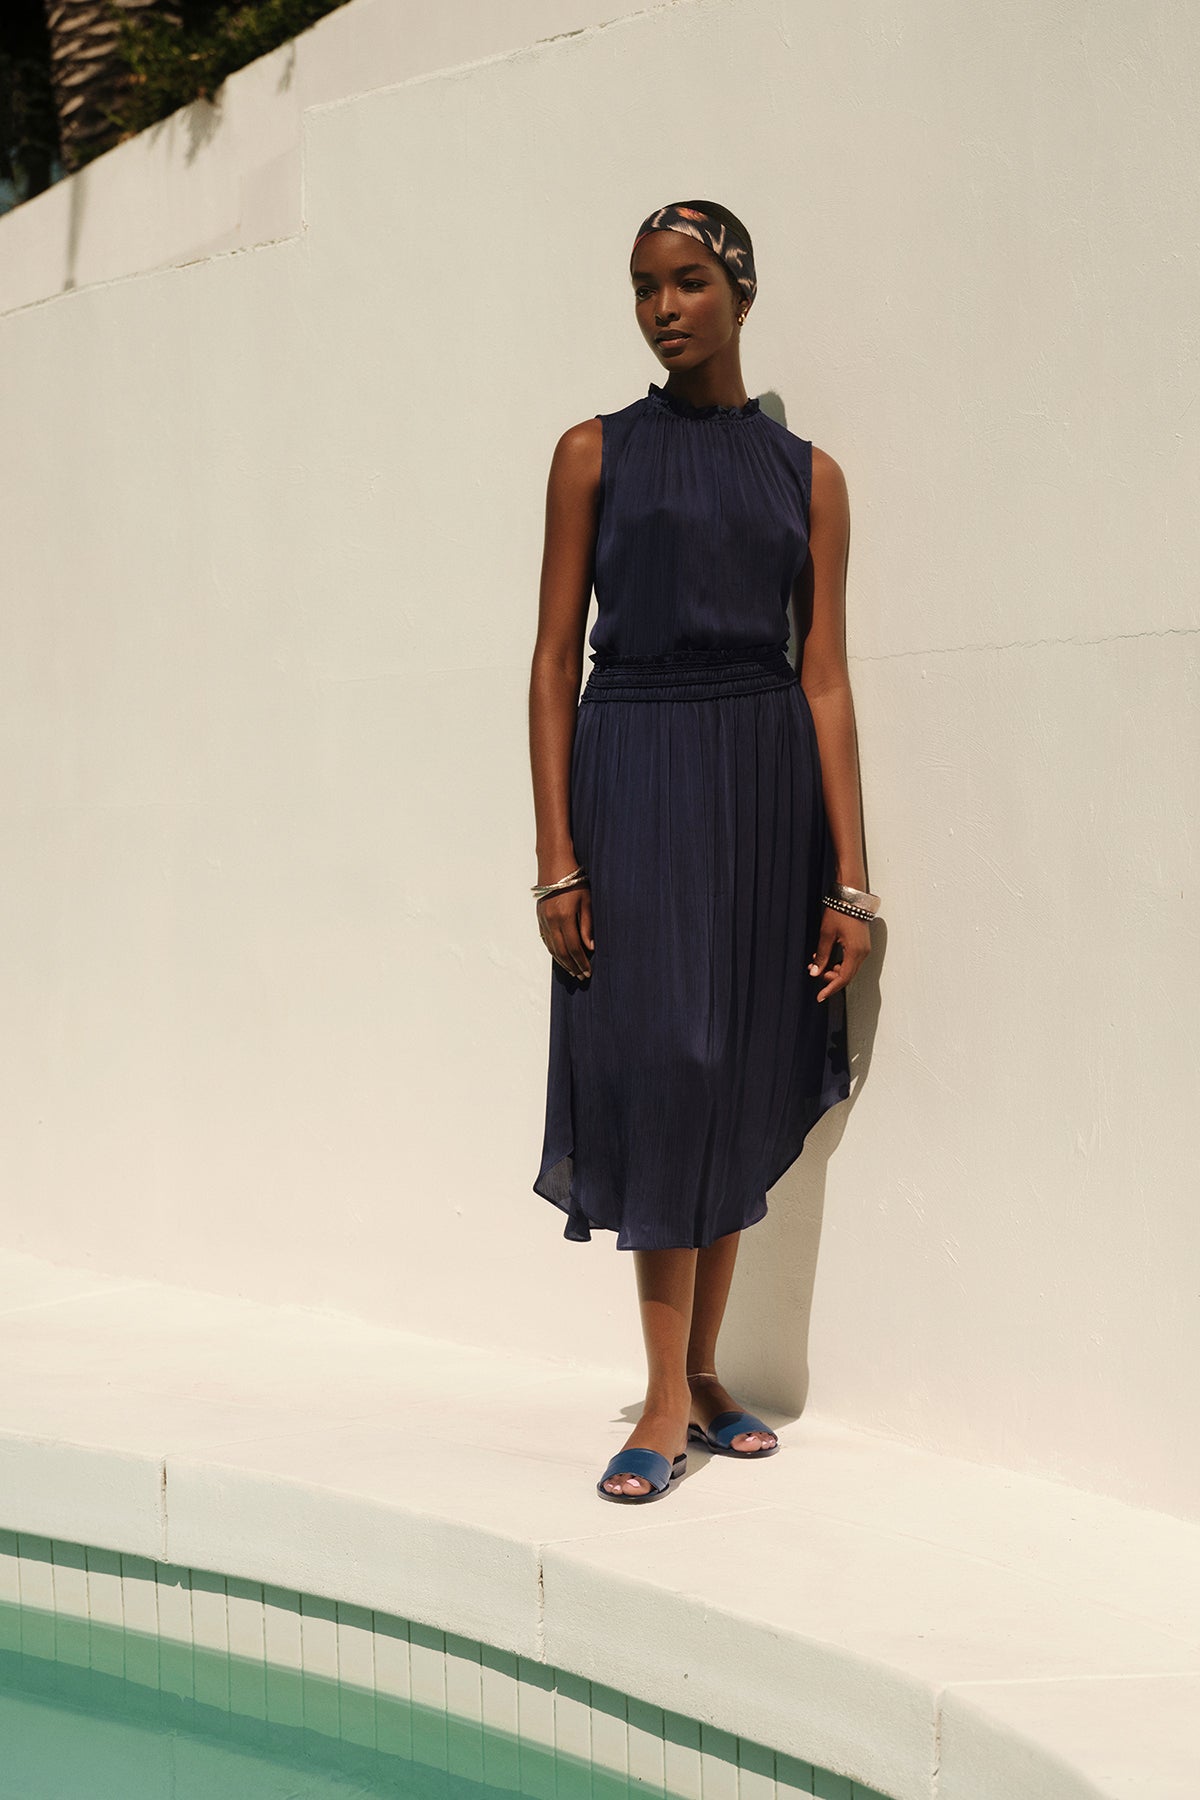 A woman in a sleeveless navy dress with DIMI SMOCKED SKIRT detailing standing beside a pool, with her shadow casting on the wall.-36409579897025